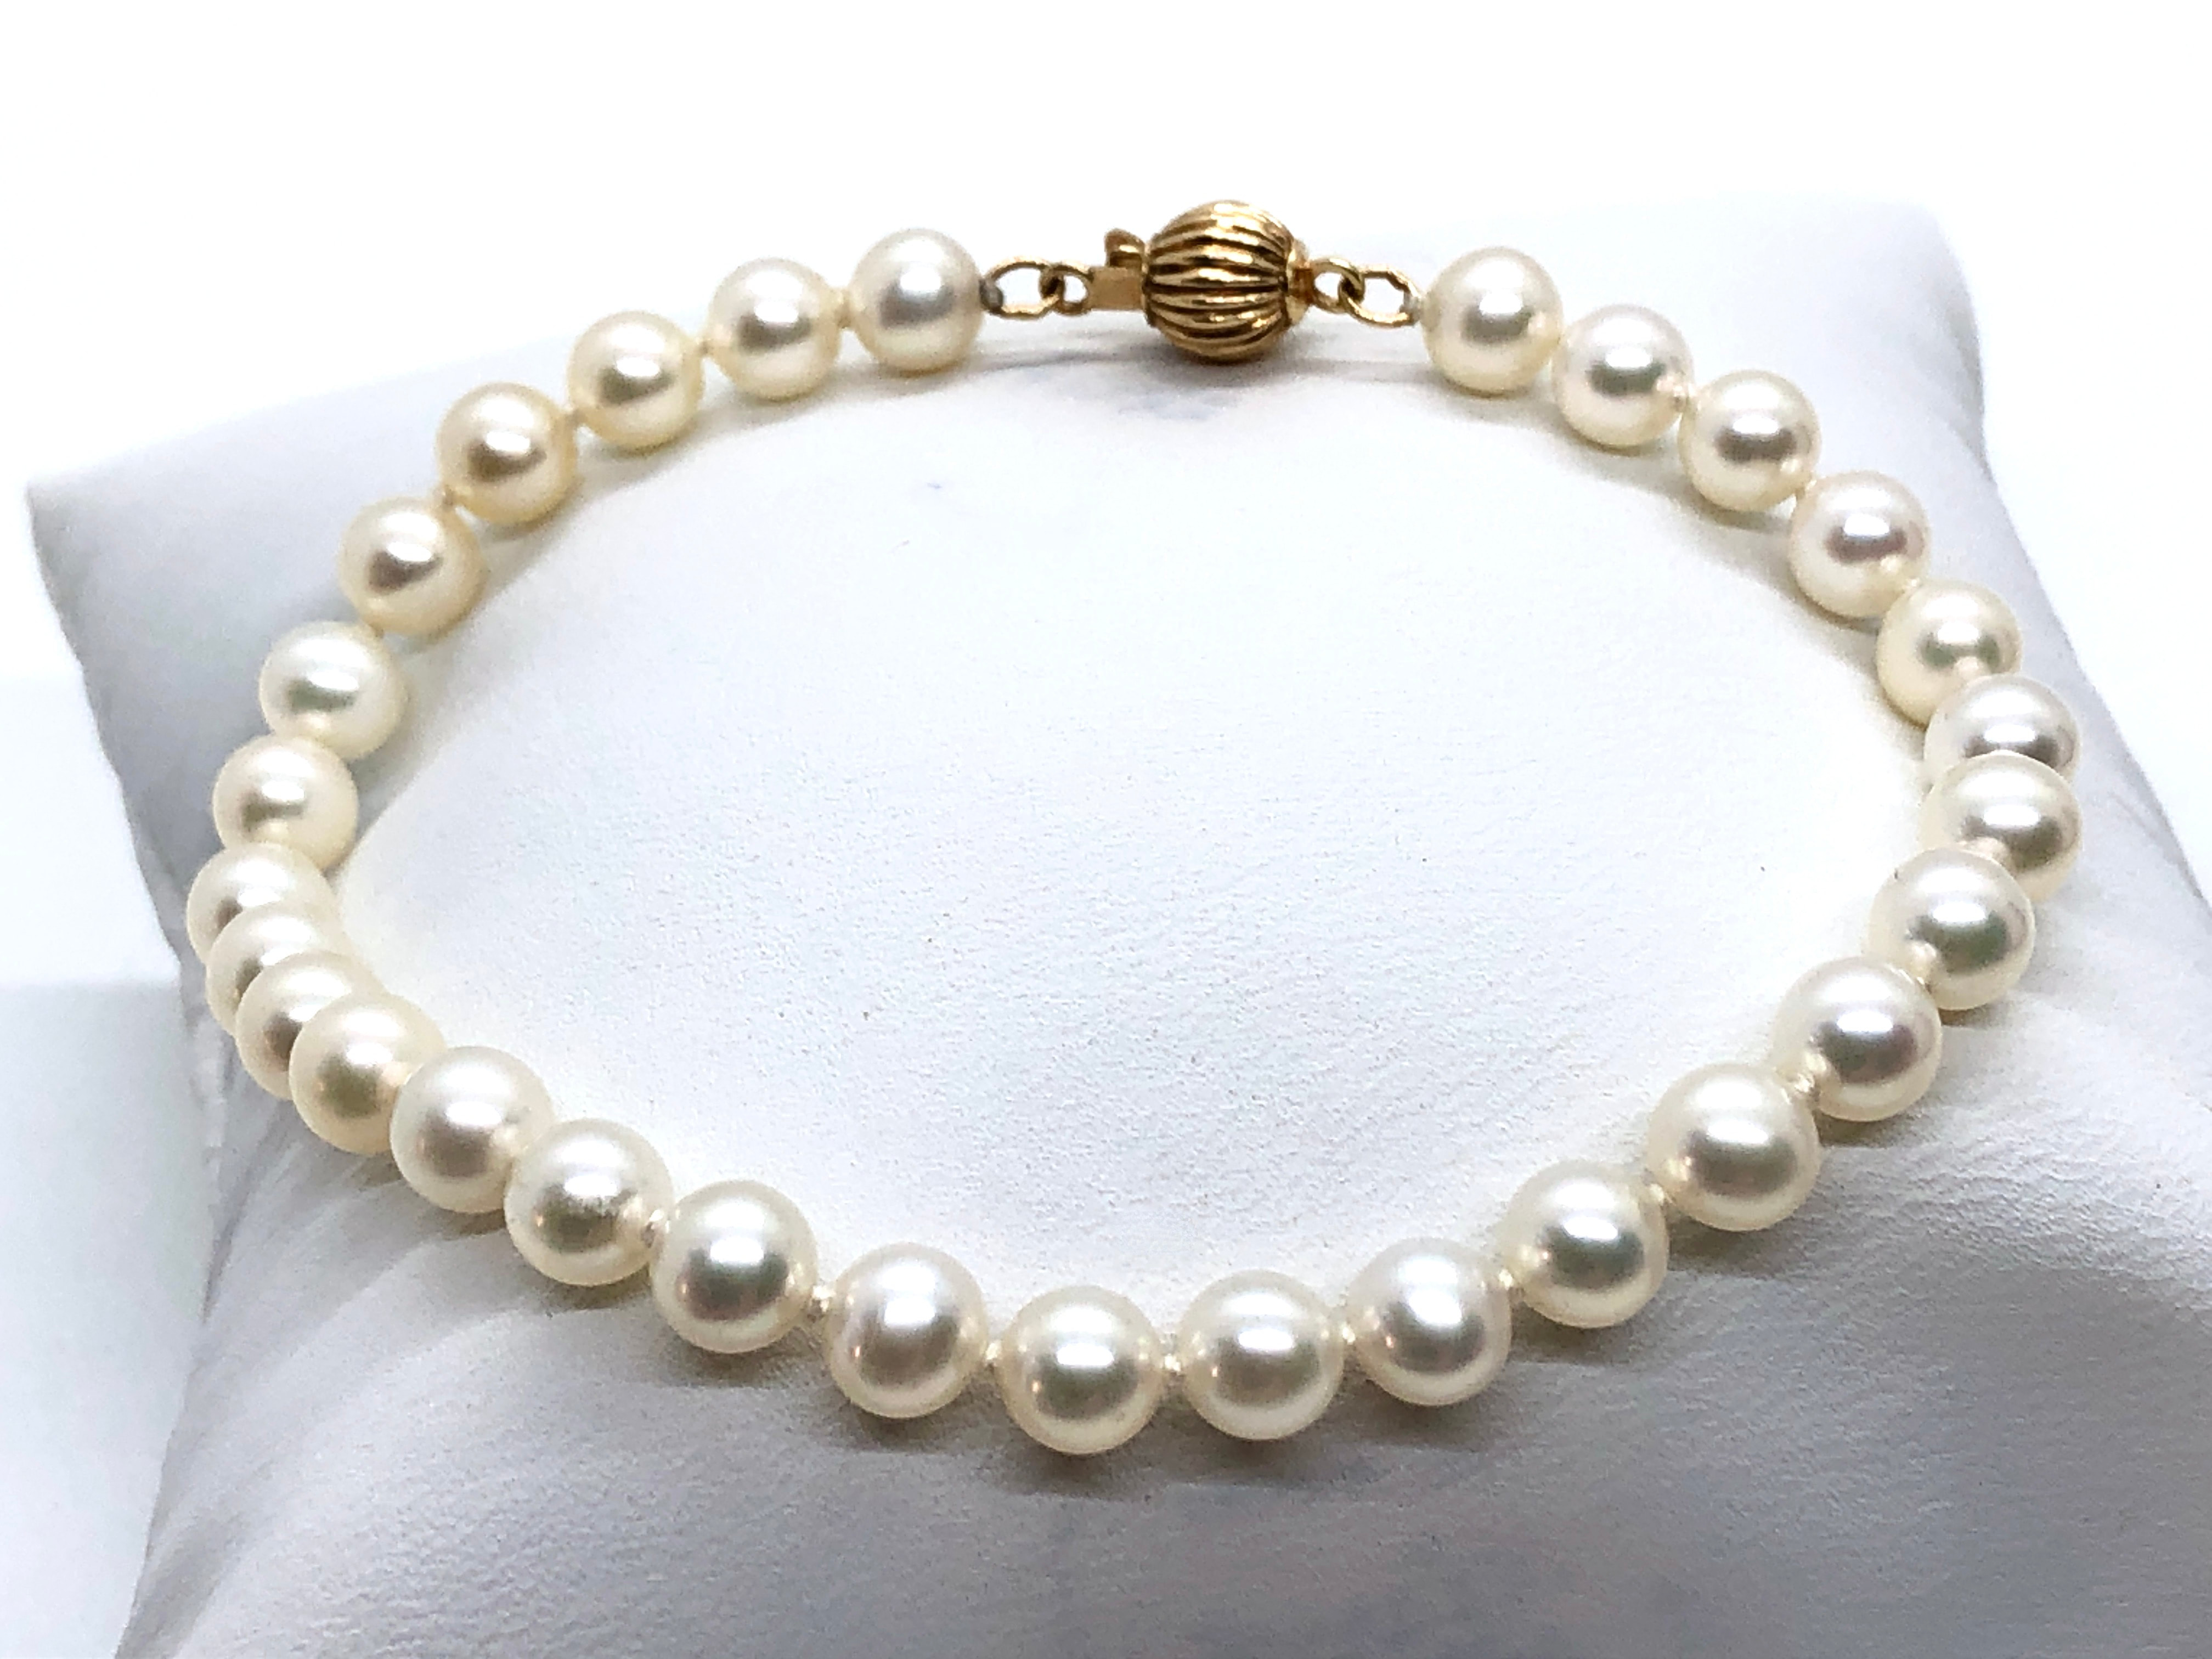 Braided Akoya Pearl Bracelet With 14K Yellow Gold Buckle Clasp - 400-13331